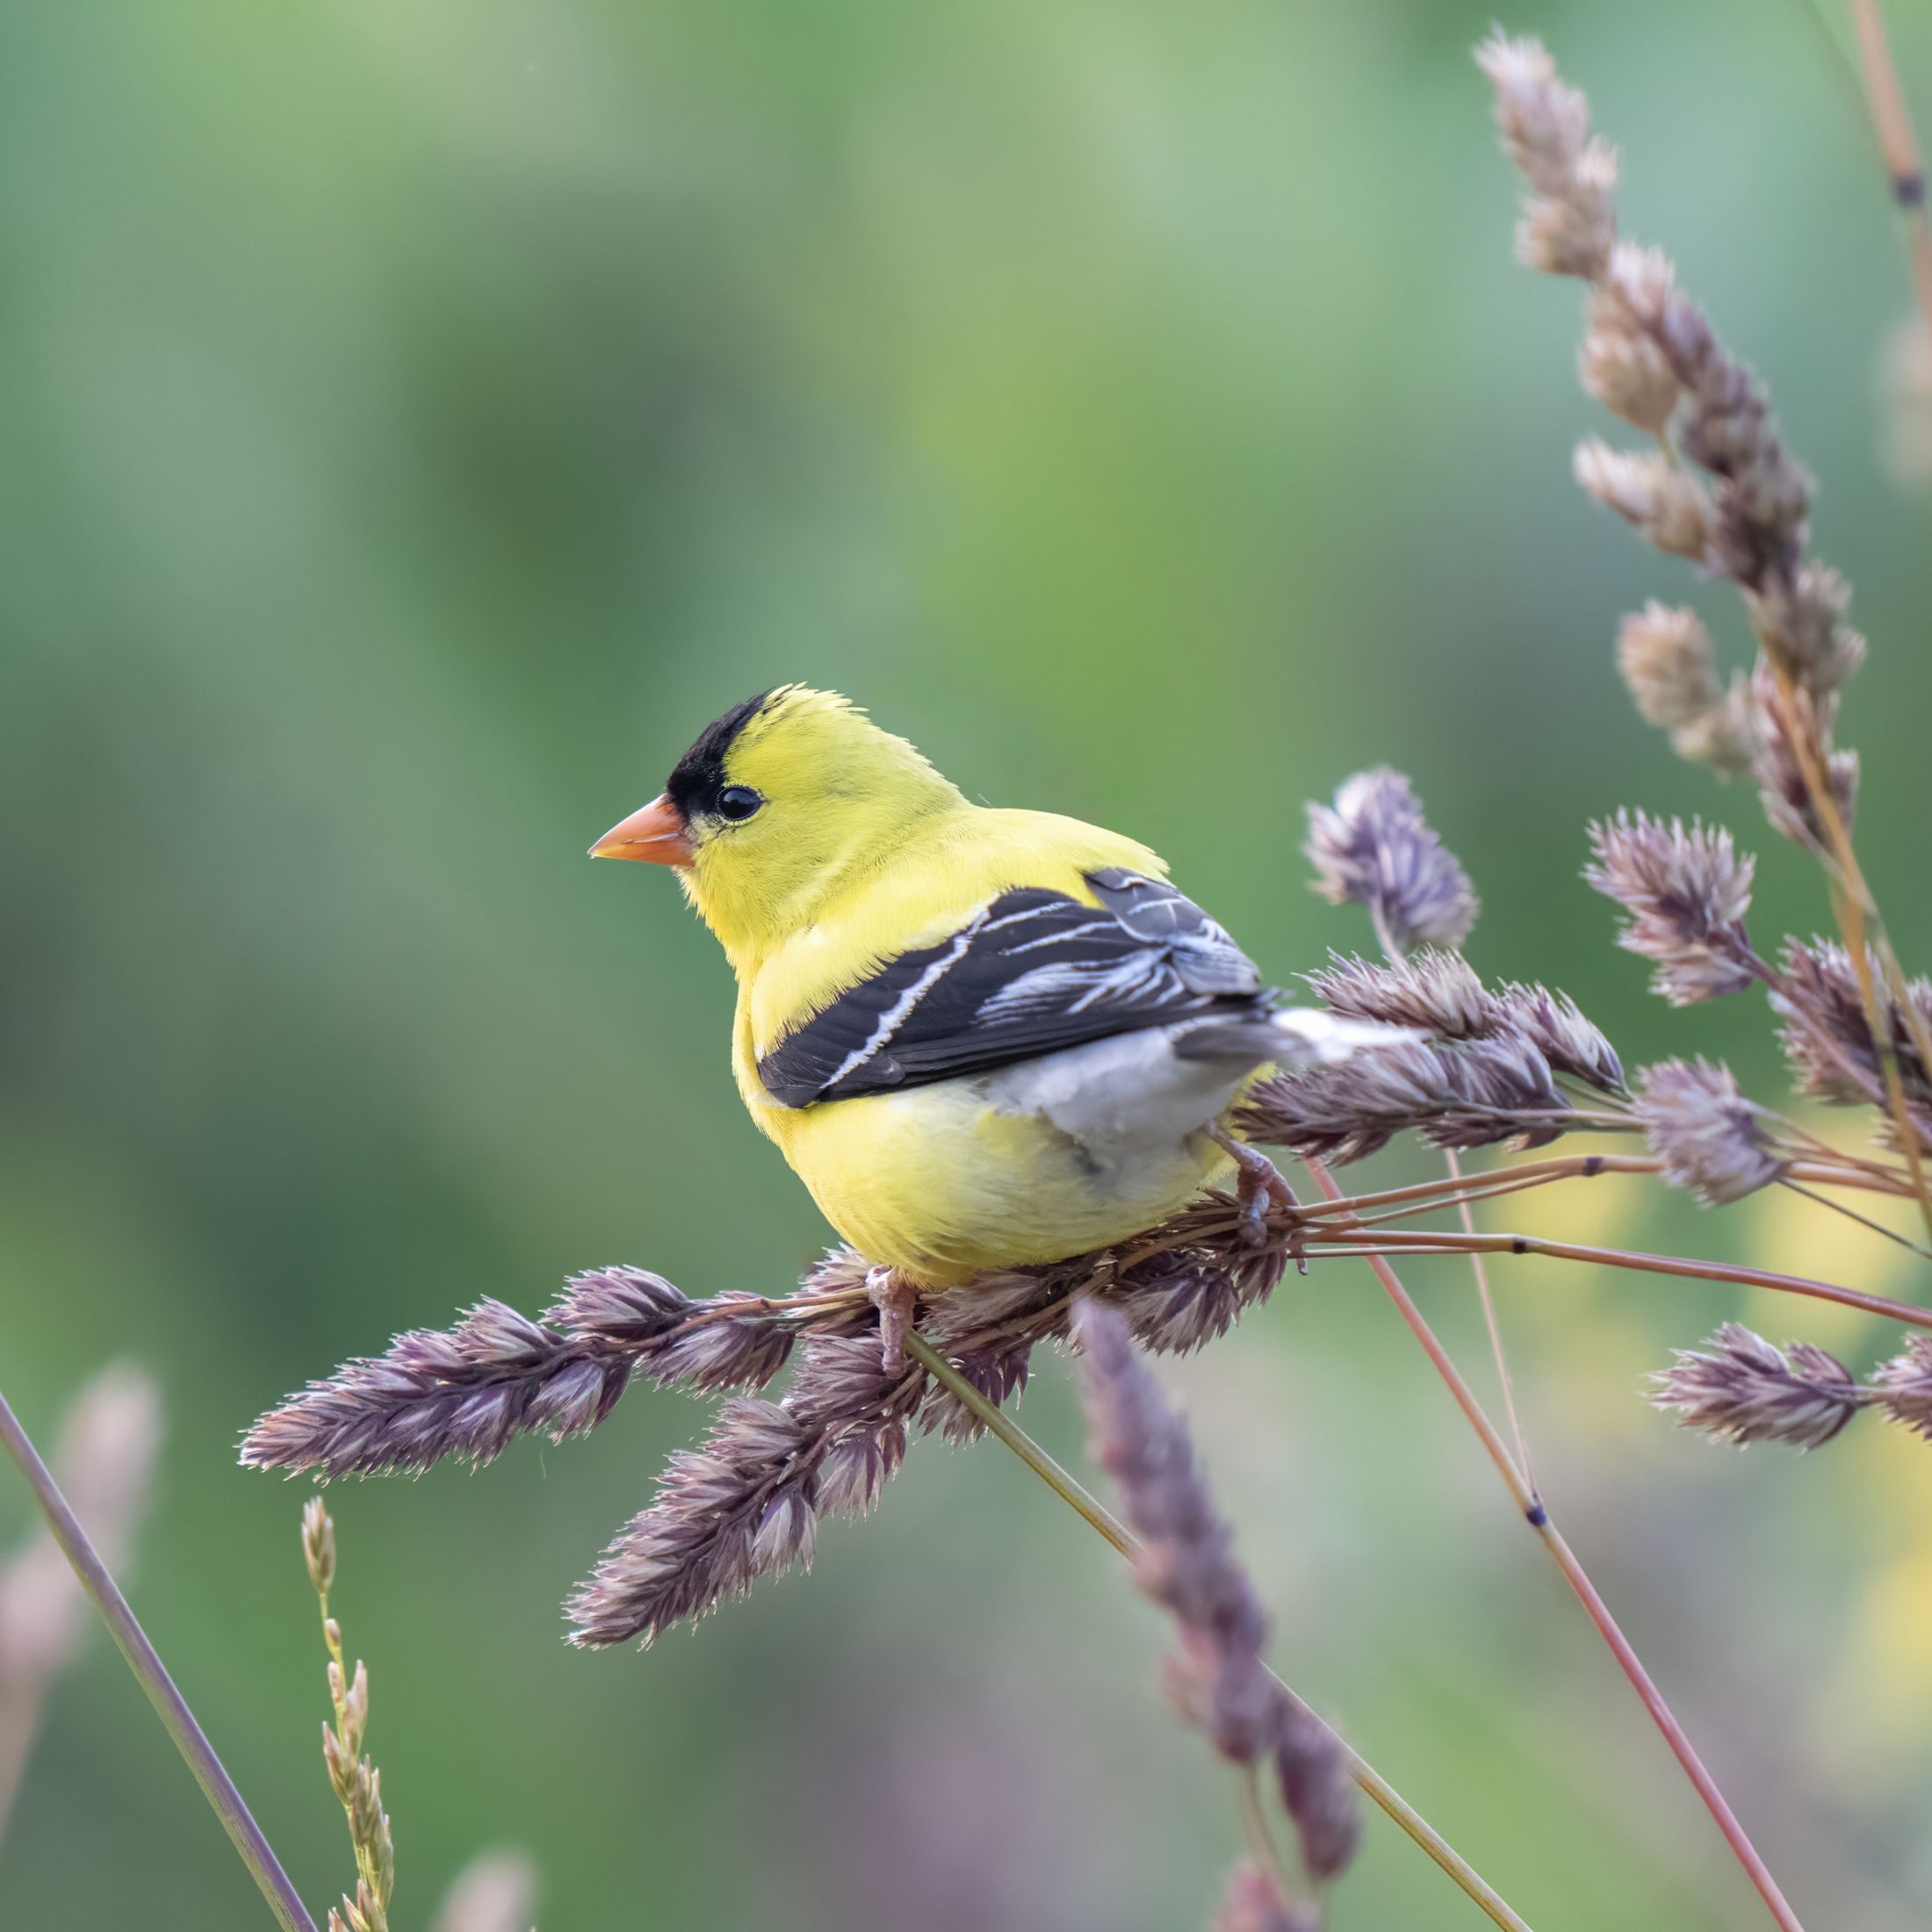 A yellow bird with black markings on its wings and head sits on a brown plant.